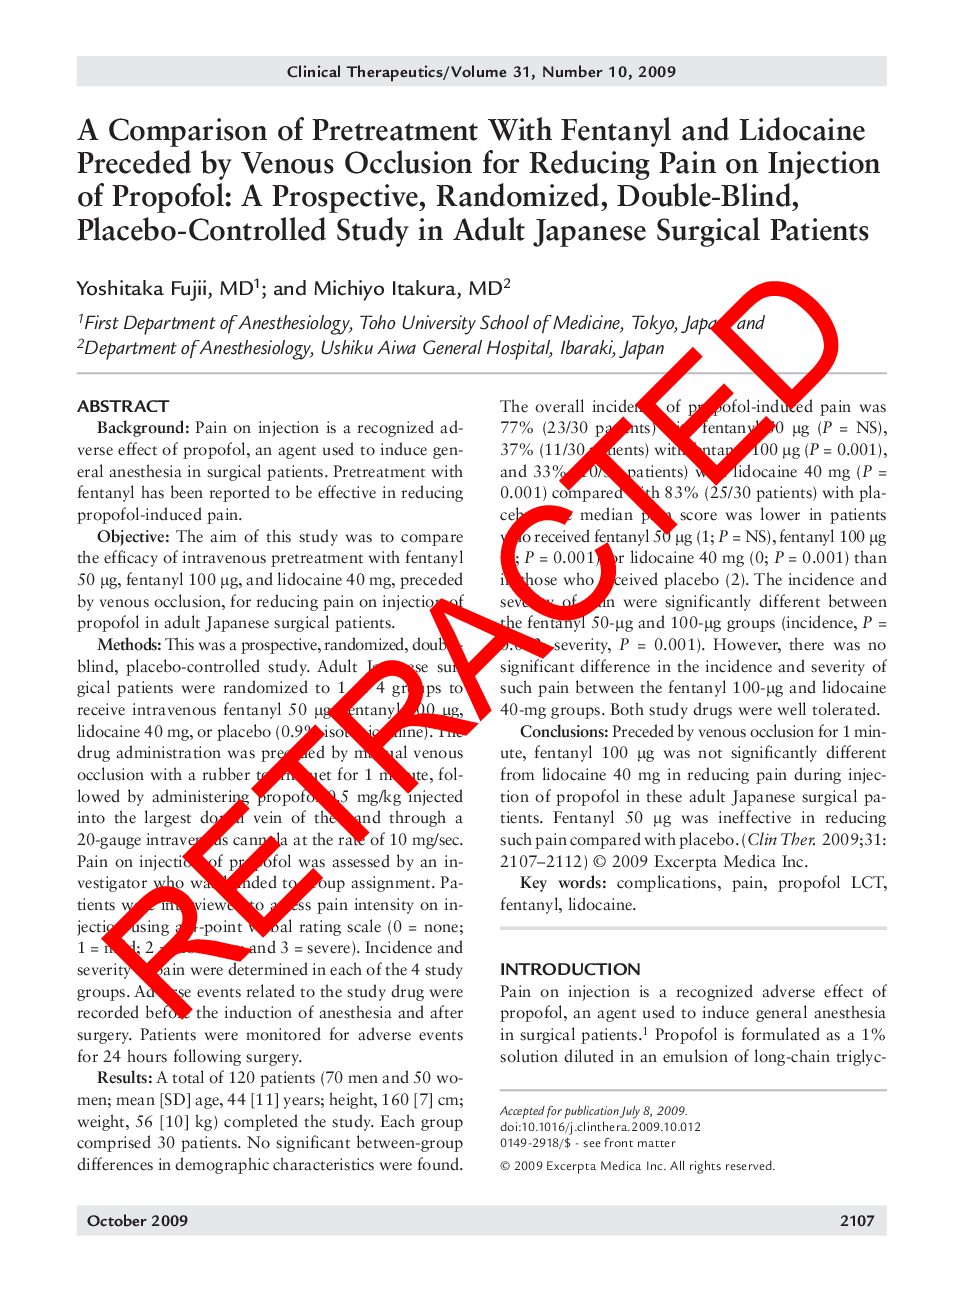 RETRACTED: A comparison of pretreatment with fentanyl and lidocaine preceded by venous occlusion for reducing pain on injection of propofol: A prospective, randomized, double-blind, placebo-controlled study in adult Japanese surgical patients